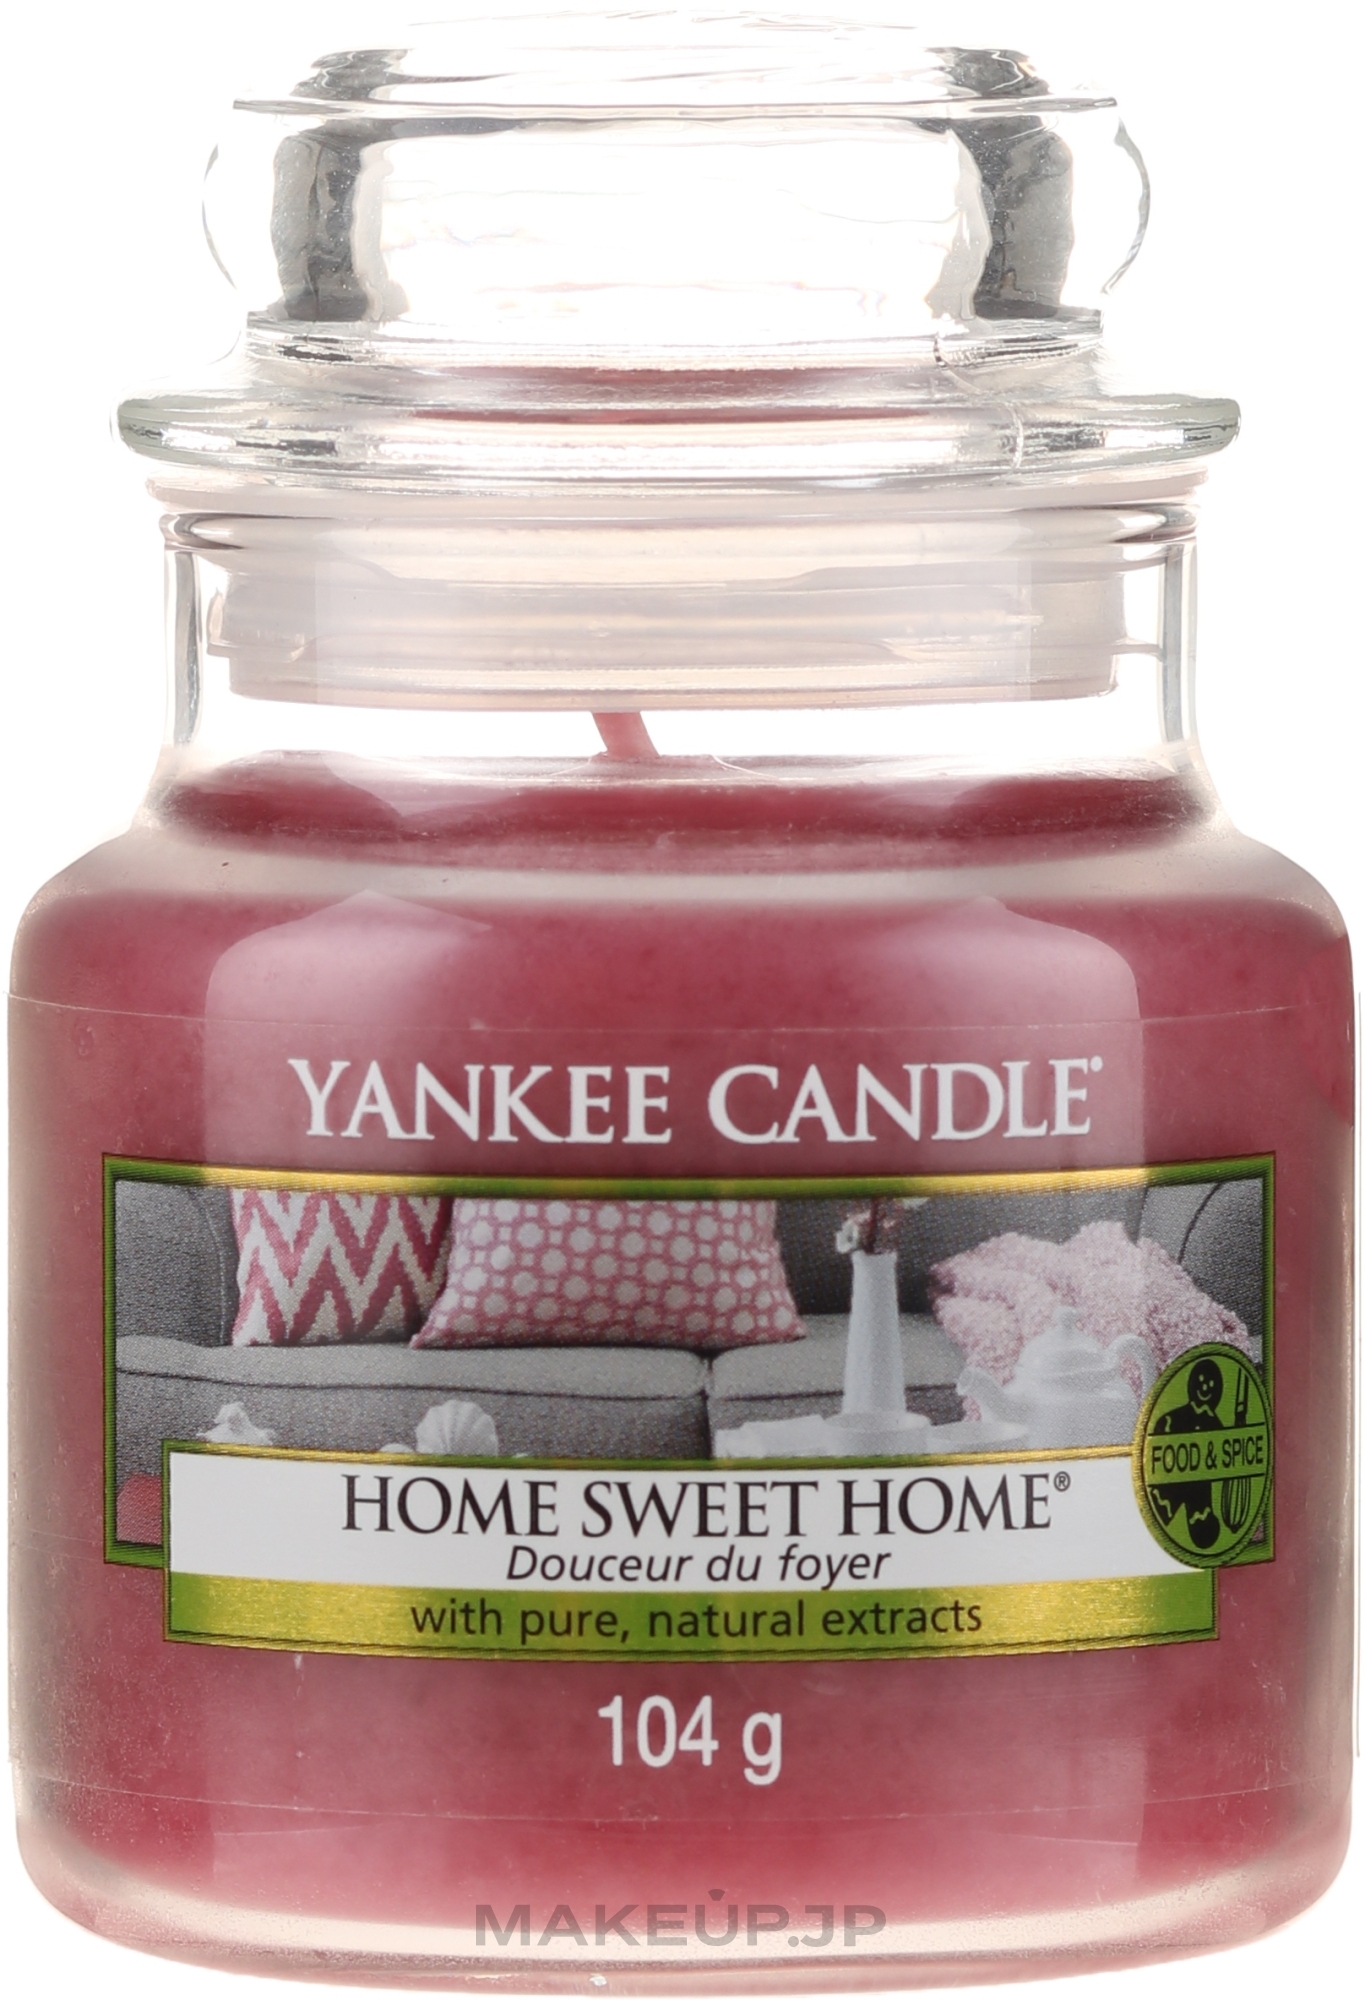 Scented Candle "Home Sweet Home" - Yankee Candle Home Sweet Home — photo 104 g